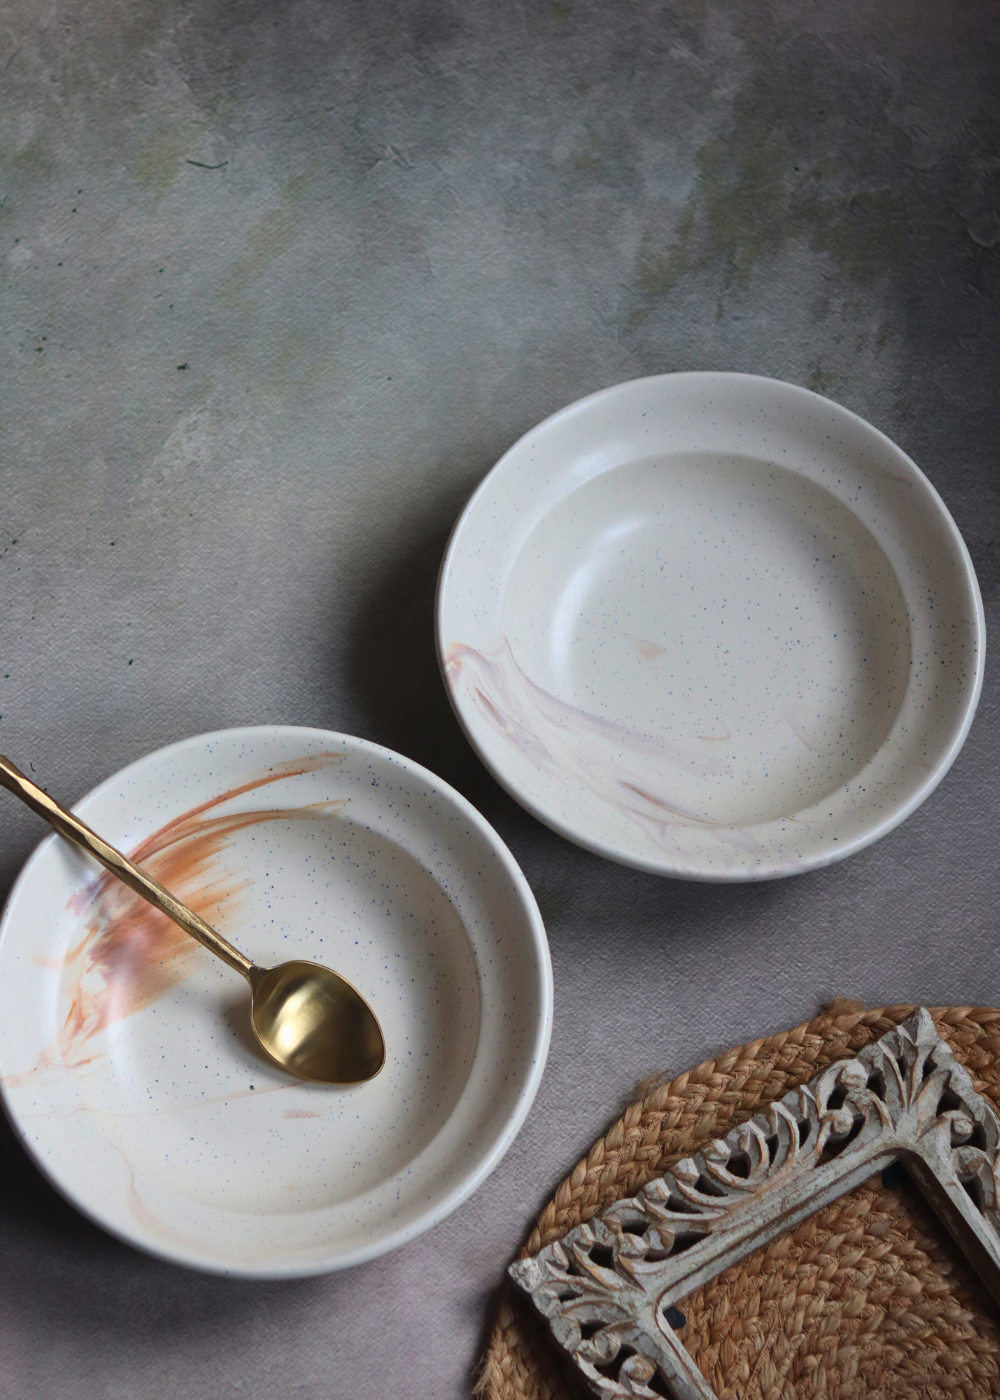 Two Handmade Ceramic Pasta Plates With Spoon